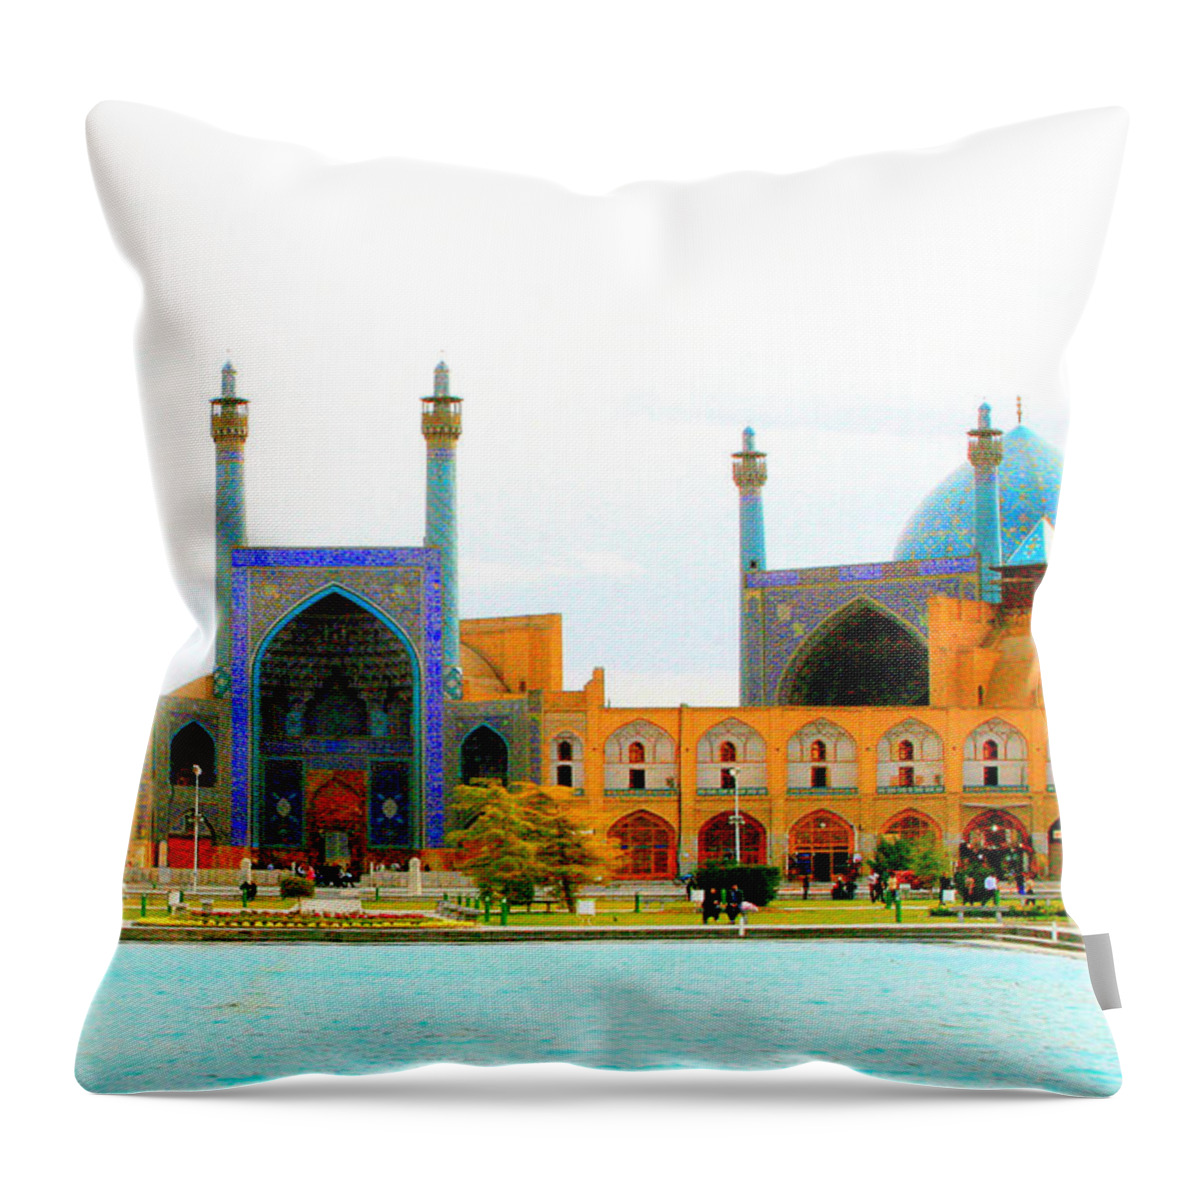 Tranquility Throw Pillow featuring the photograph Shah Mosque Of Naghsh-i Jahan Square by Sam W Stearman